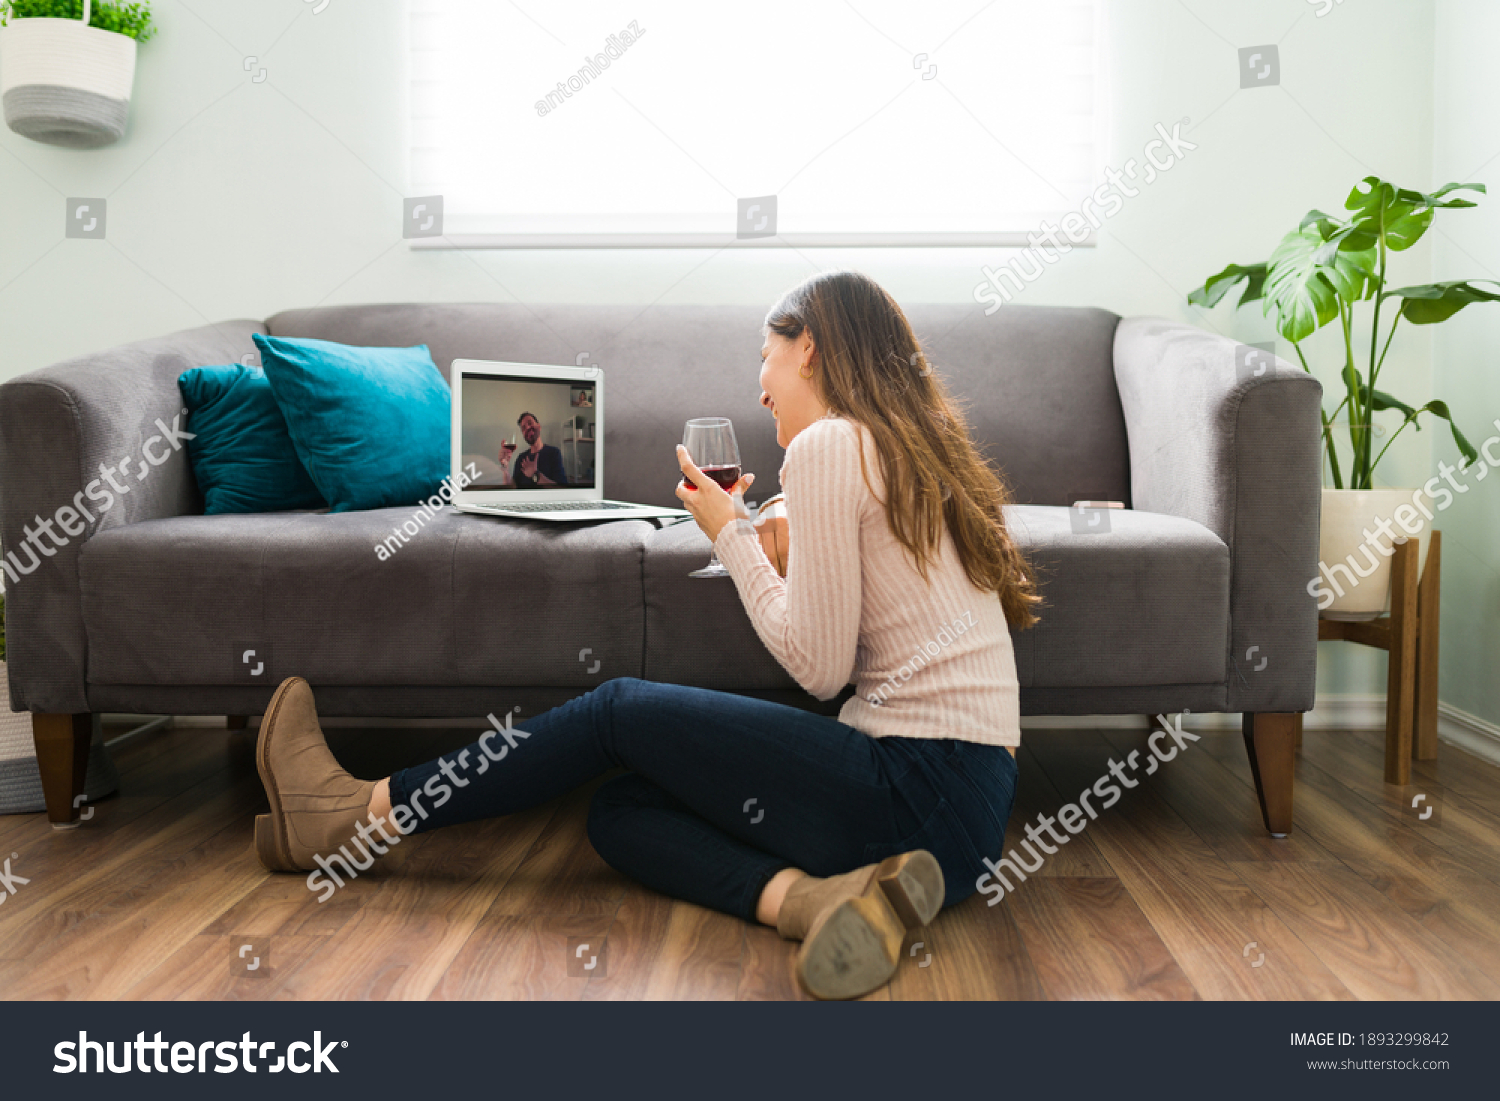 Good looking couple in a long-distance relationship is laughing and having a good time during a romatic online date  #1893299842